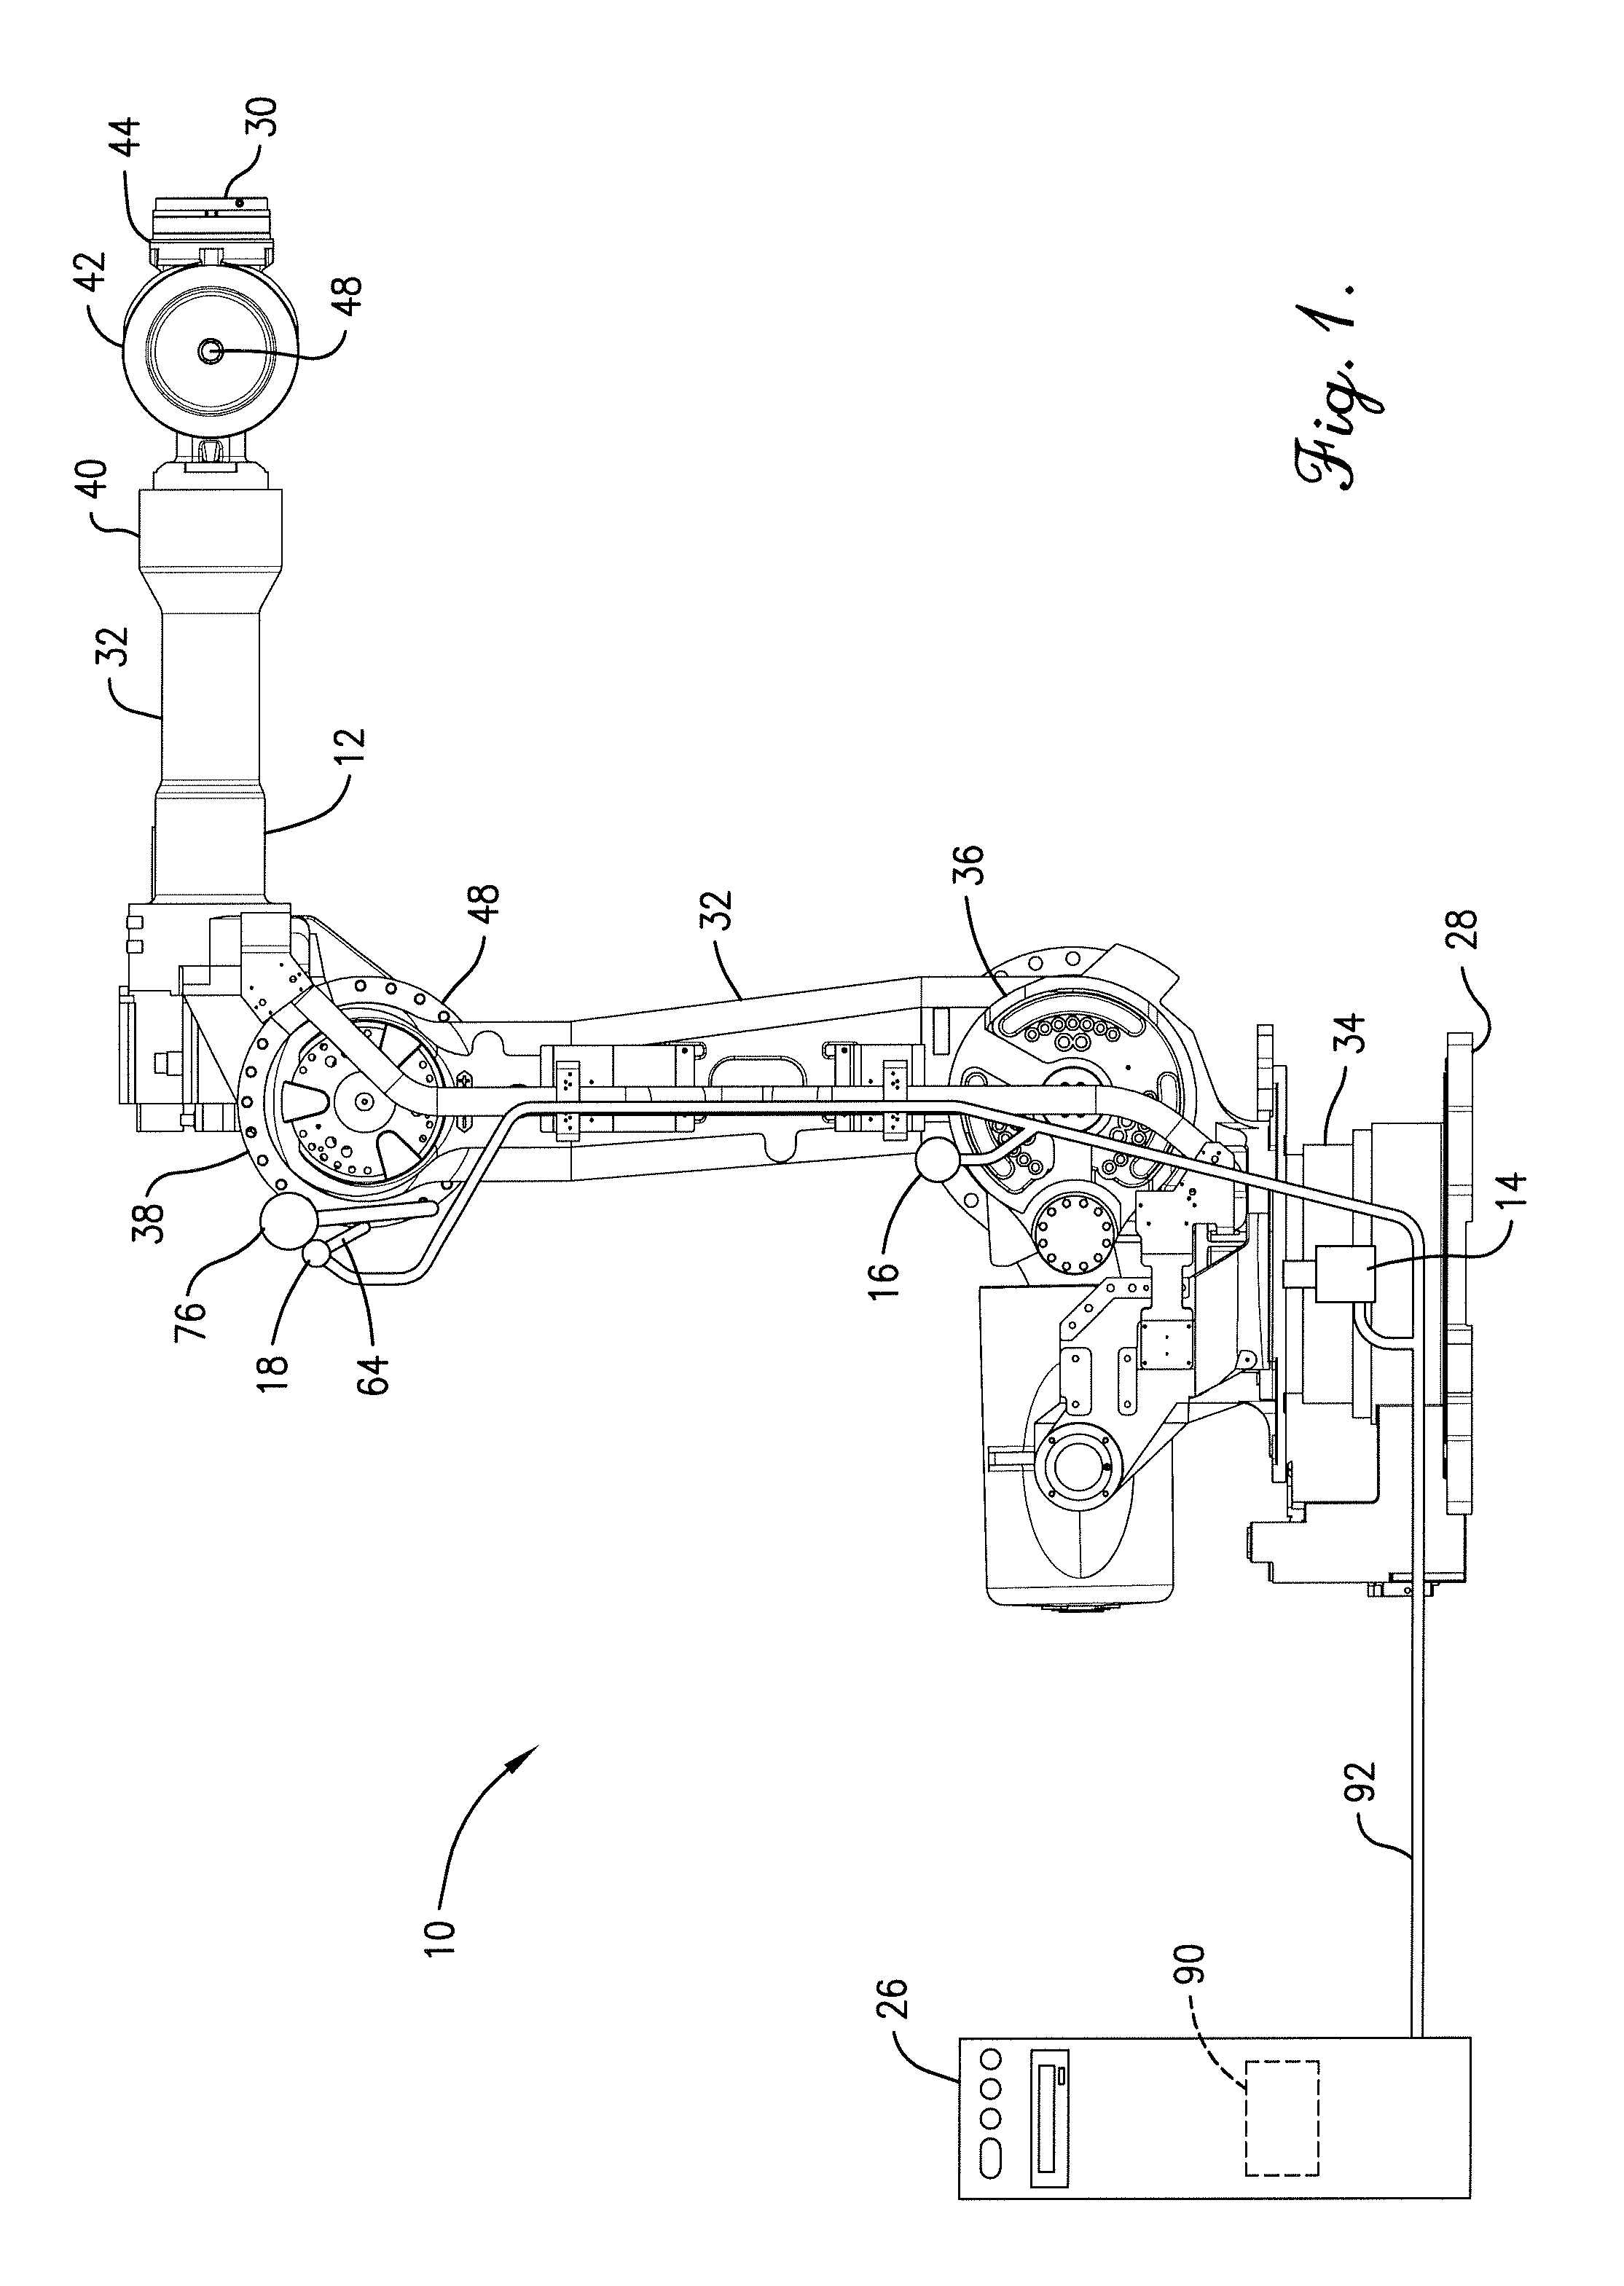 System and method for robotic accuracy improvement